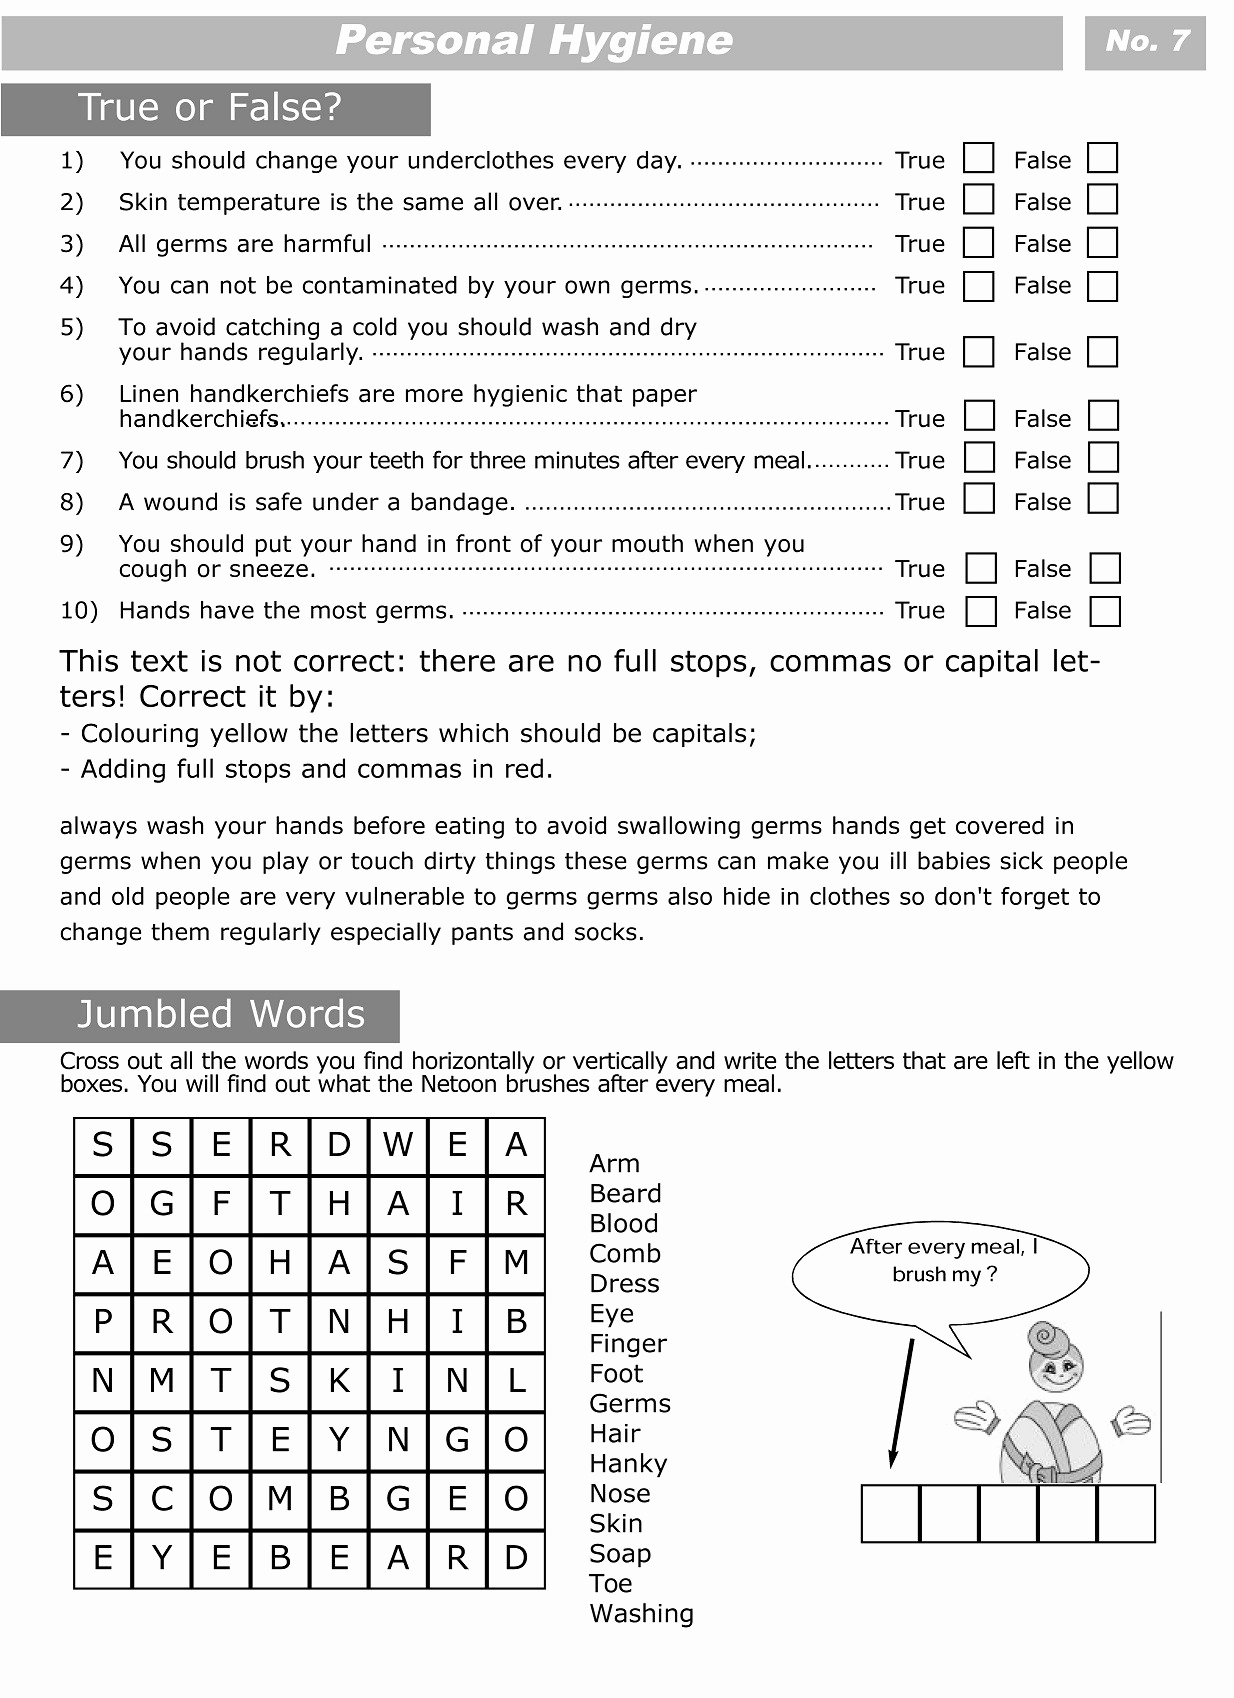 Middle School Health Worksheets Pdf Awesome Middle School Health Worksheets Pdf